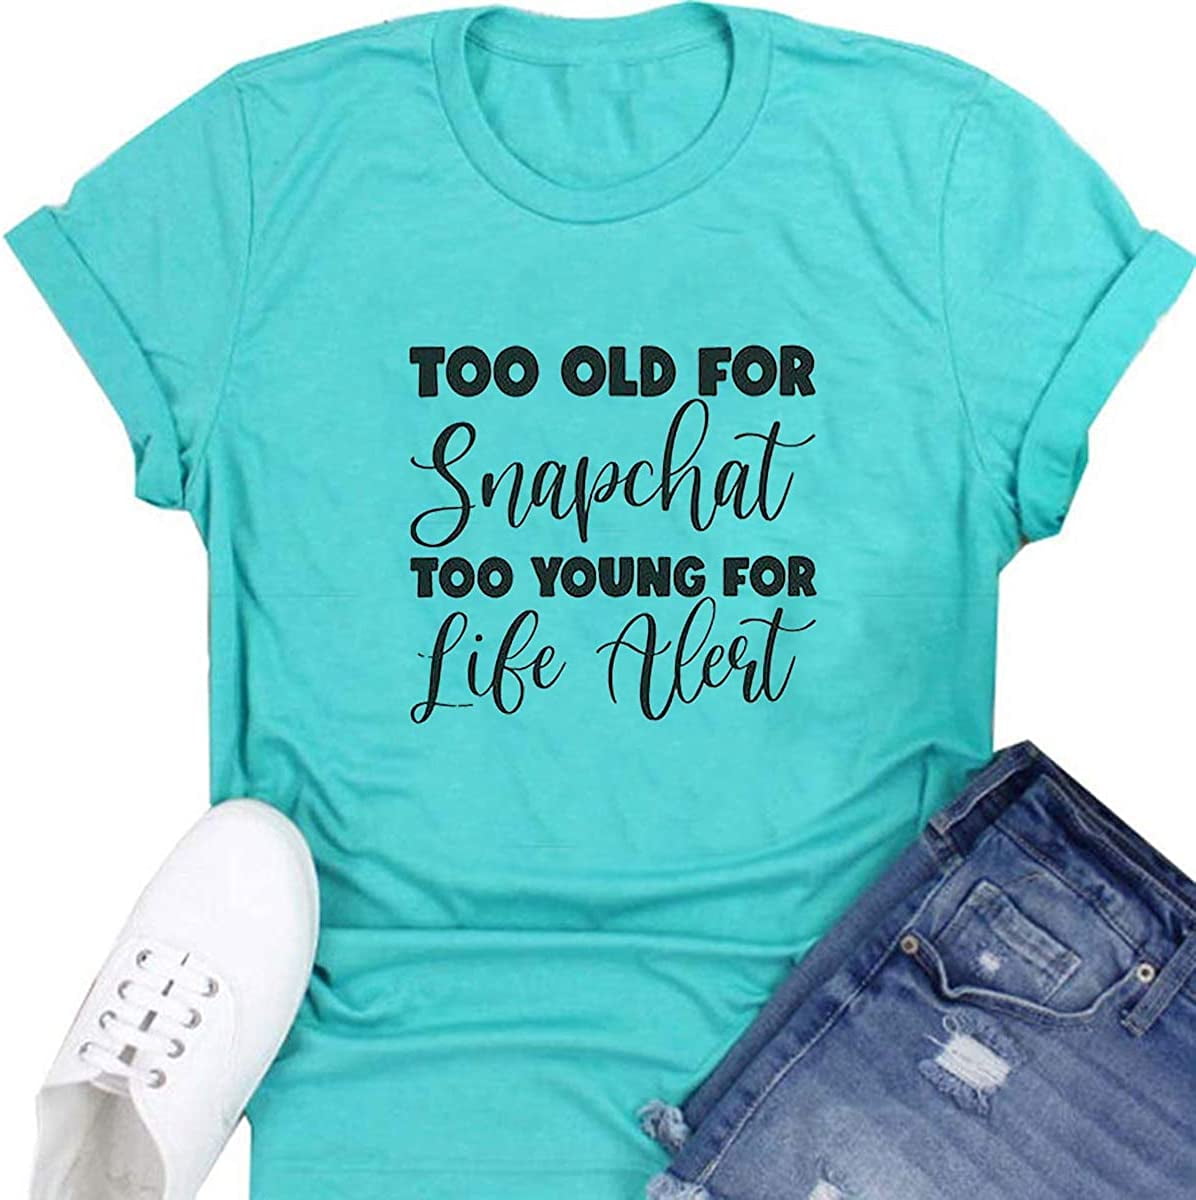 MeiGuiSha Women's Too Told for Snapchat Novelty Letter Printing Funny  Casaul T-Shirts Top Tee 1-water Blue Small 